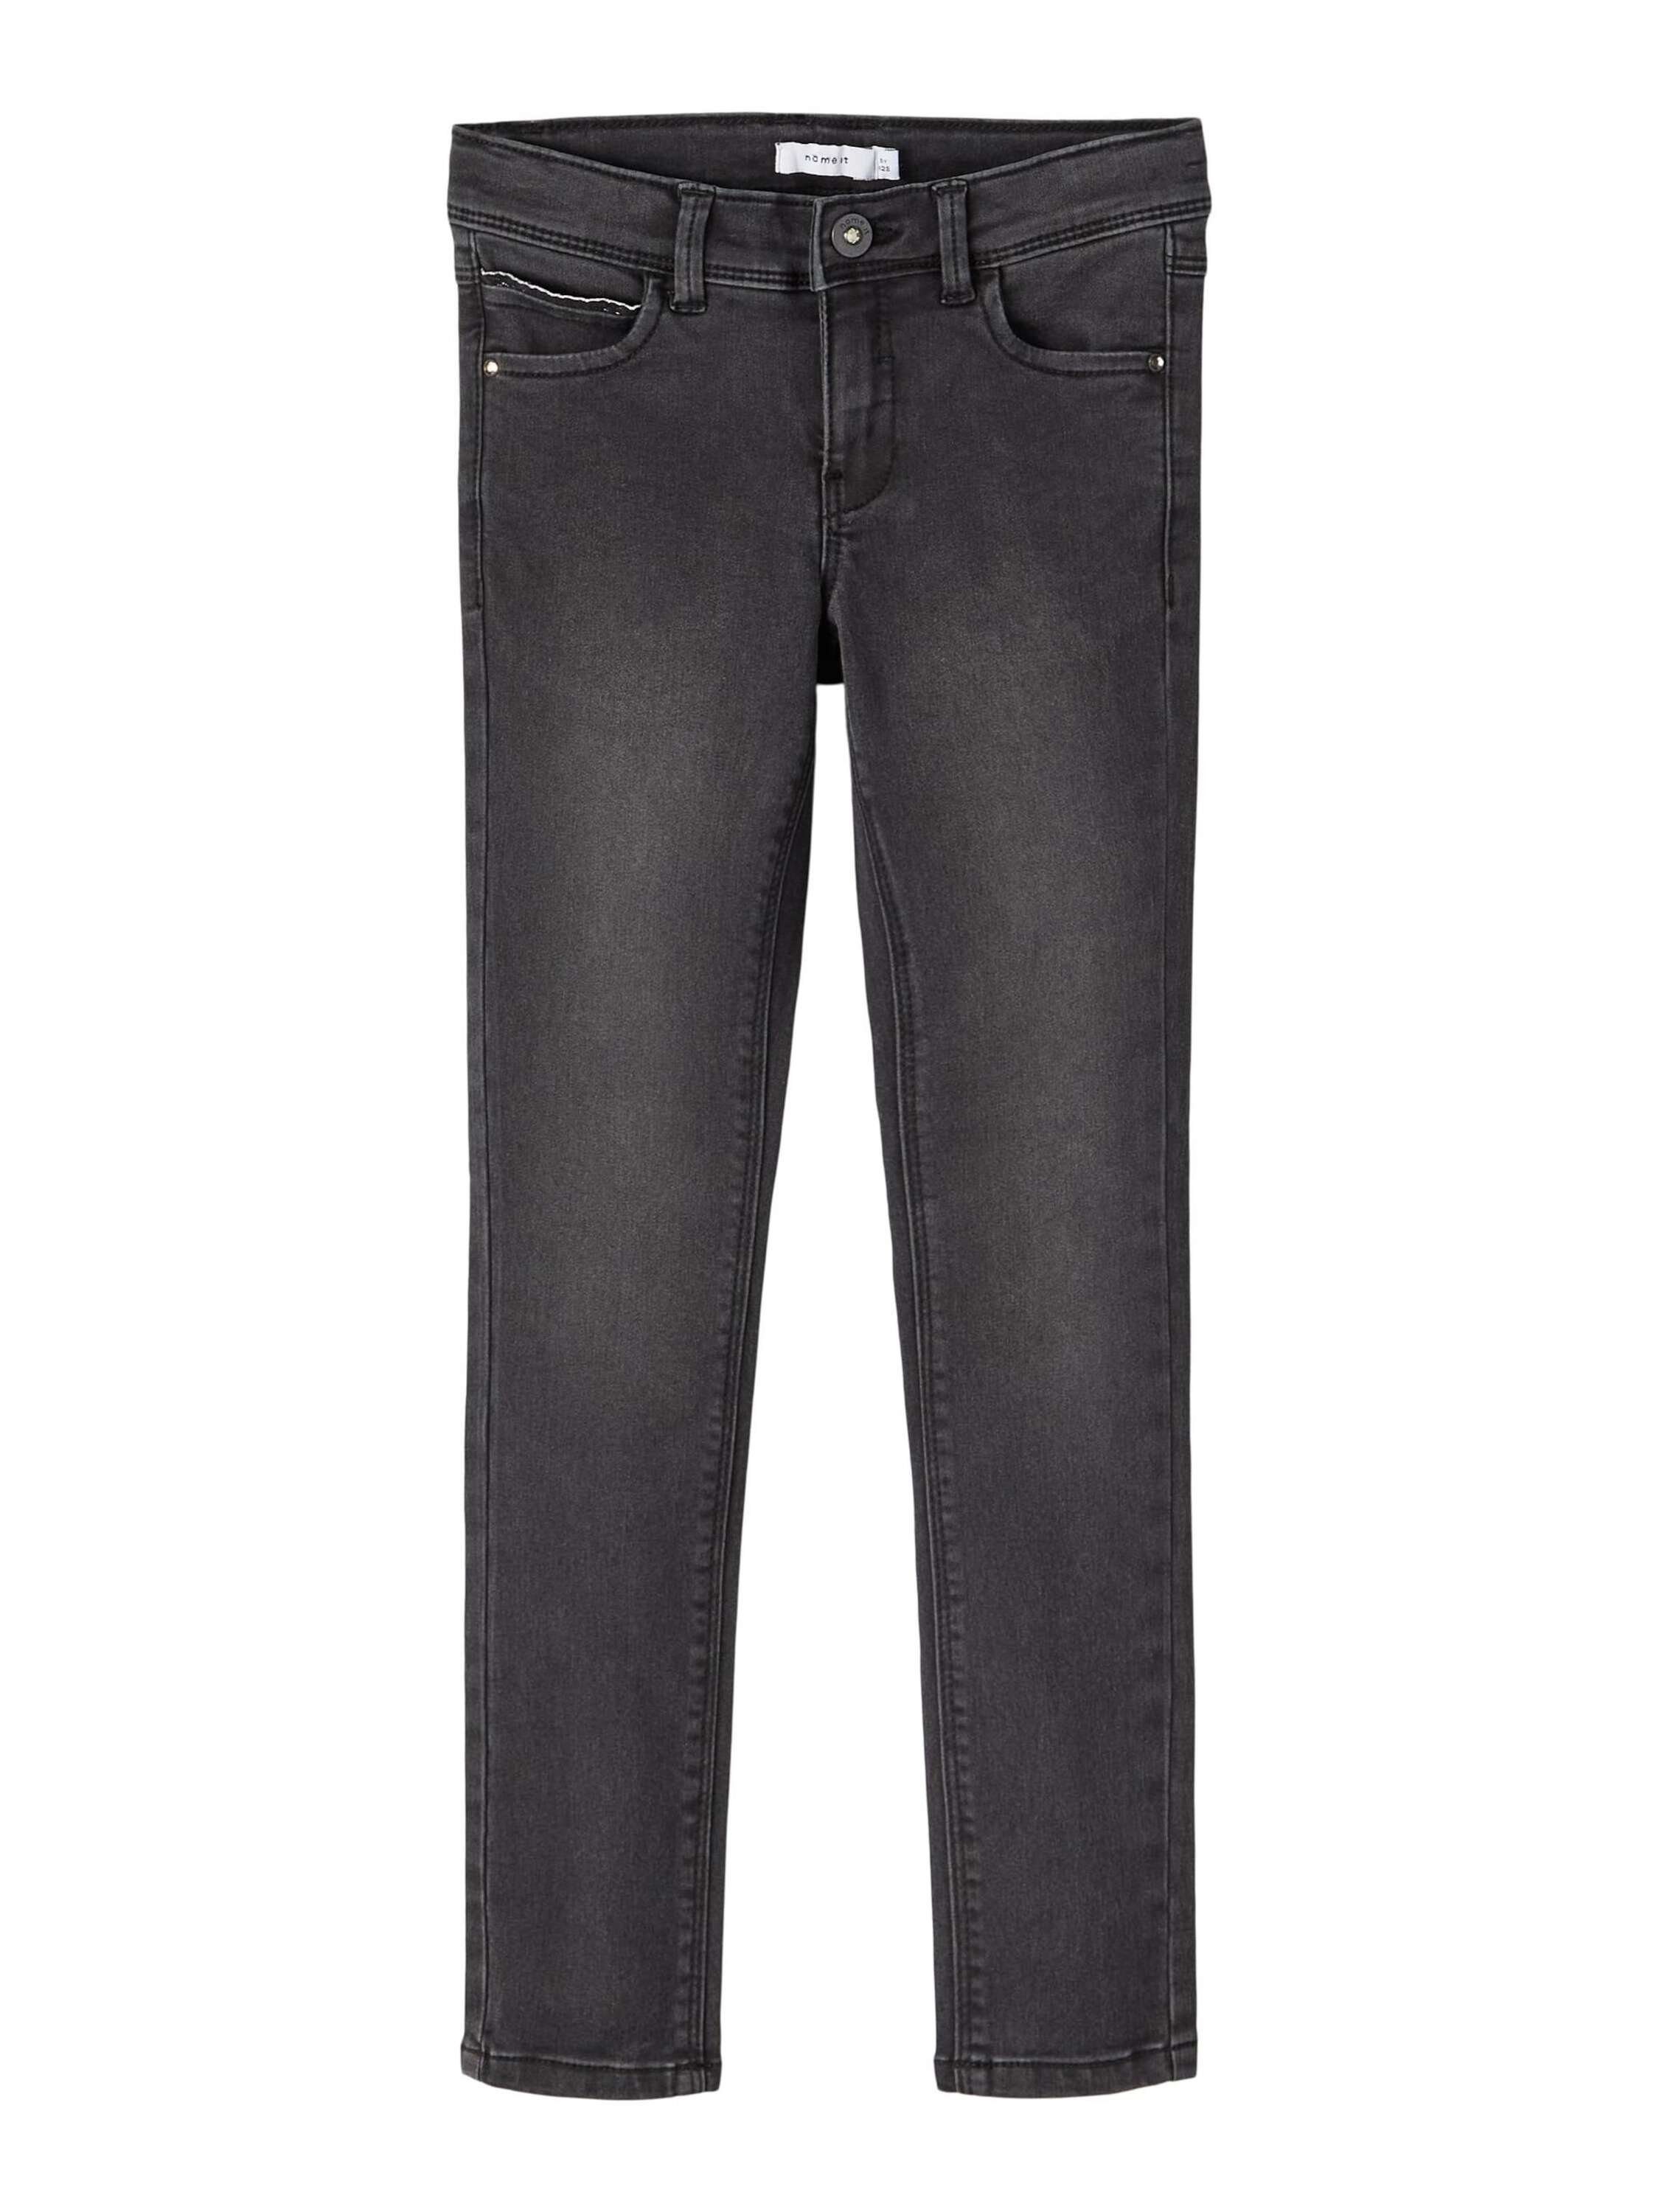 Name Polly (1-tlg) Details Weiteres Plain/ohne Slim-fit-Jeans It Detail,